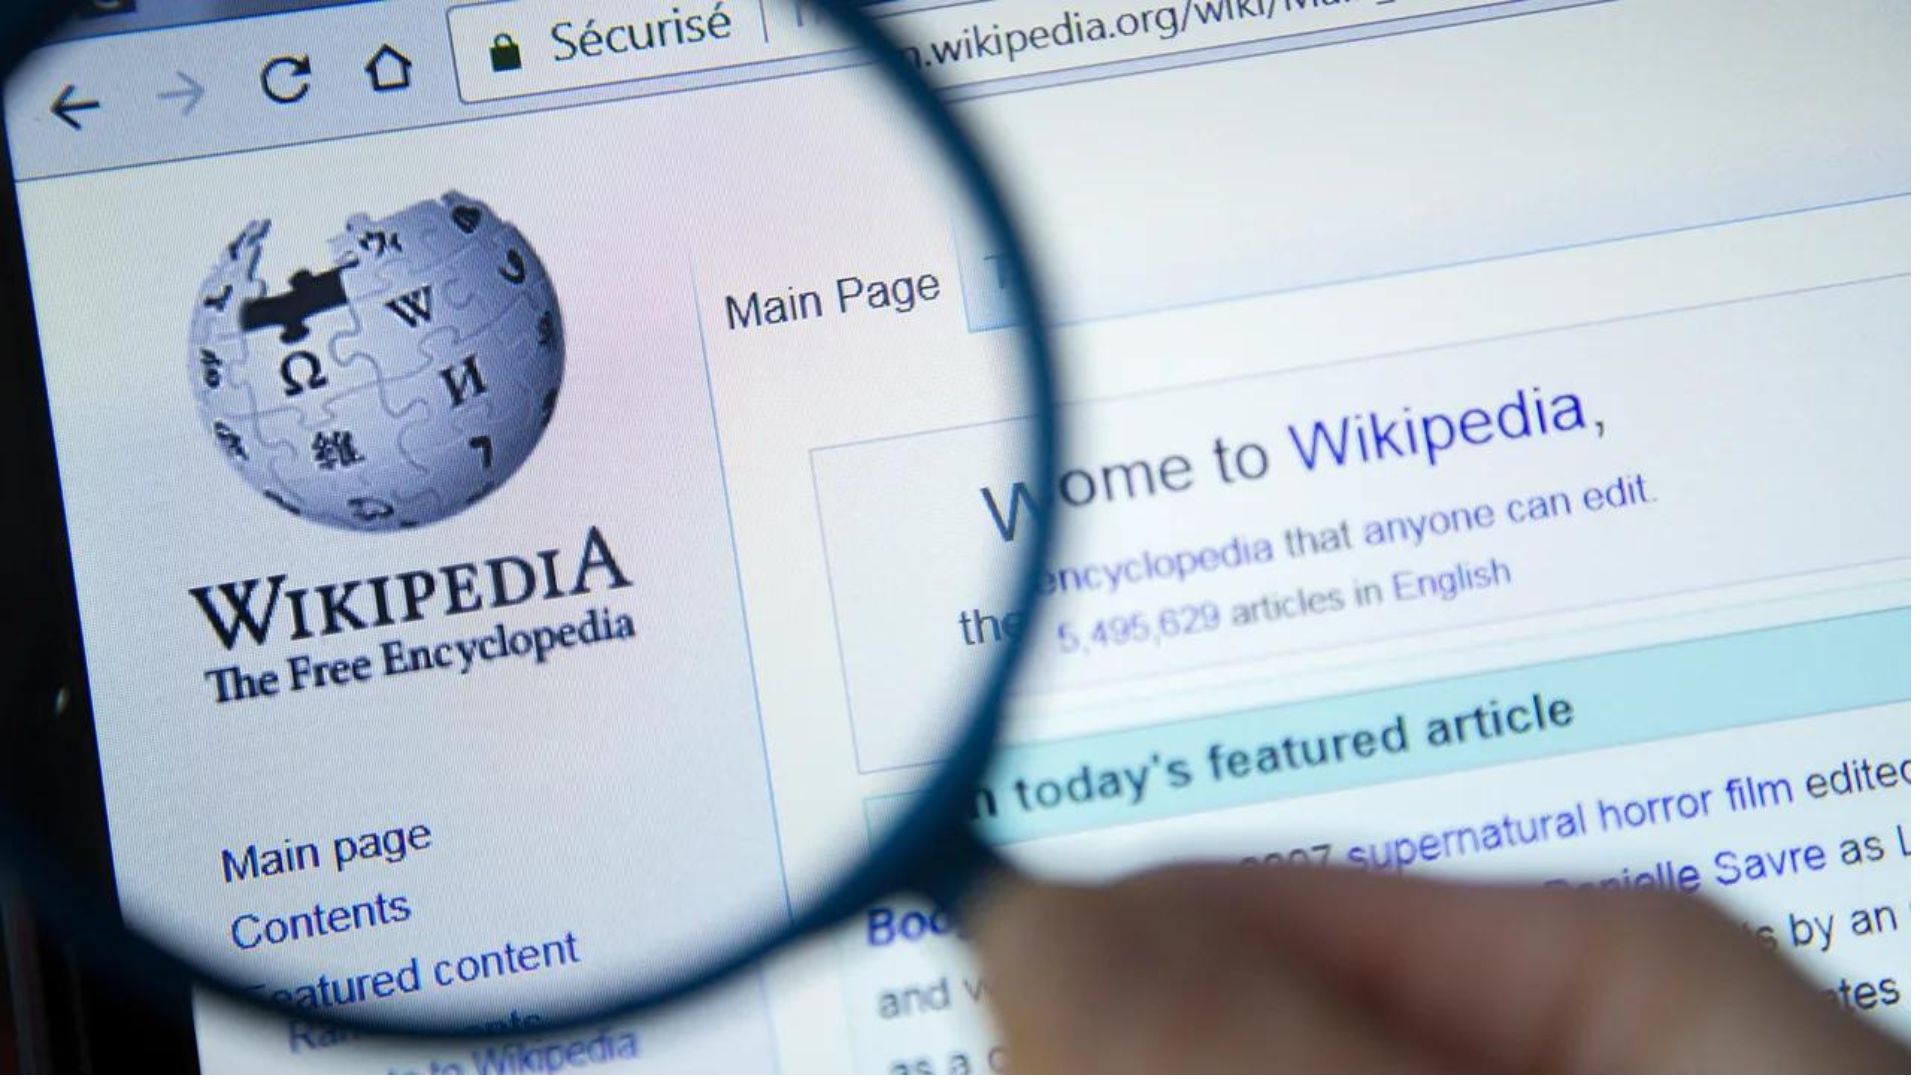 0Wikipedia Org - Origins And History